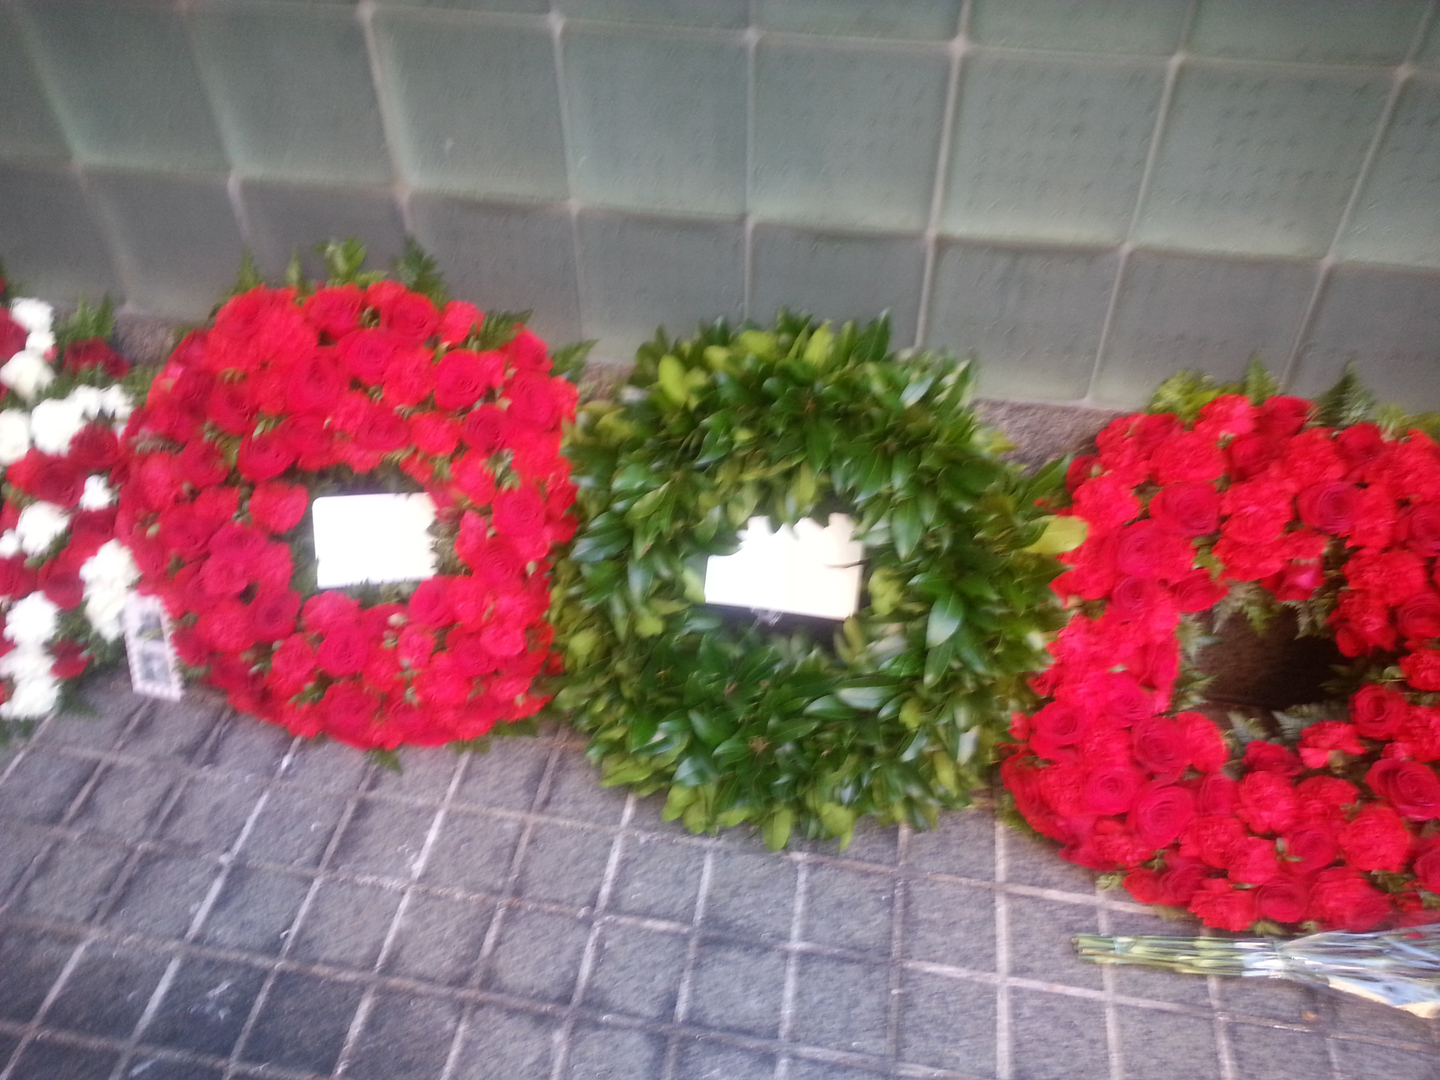 Traditional Irish laurel leaf wreaths laid in New York commemorate the Irish who died serving with Allied troops at Gallipoli.